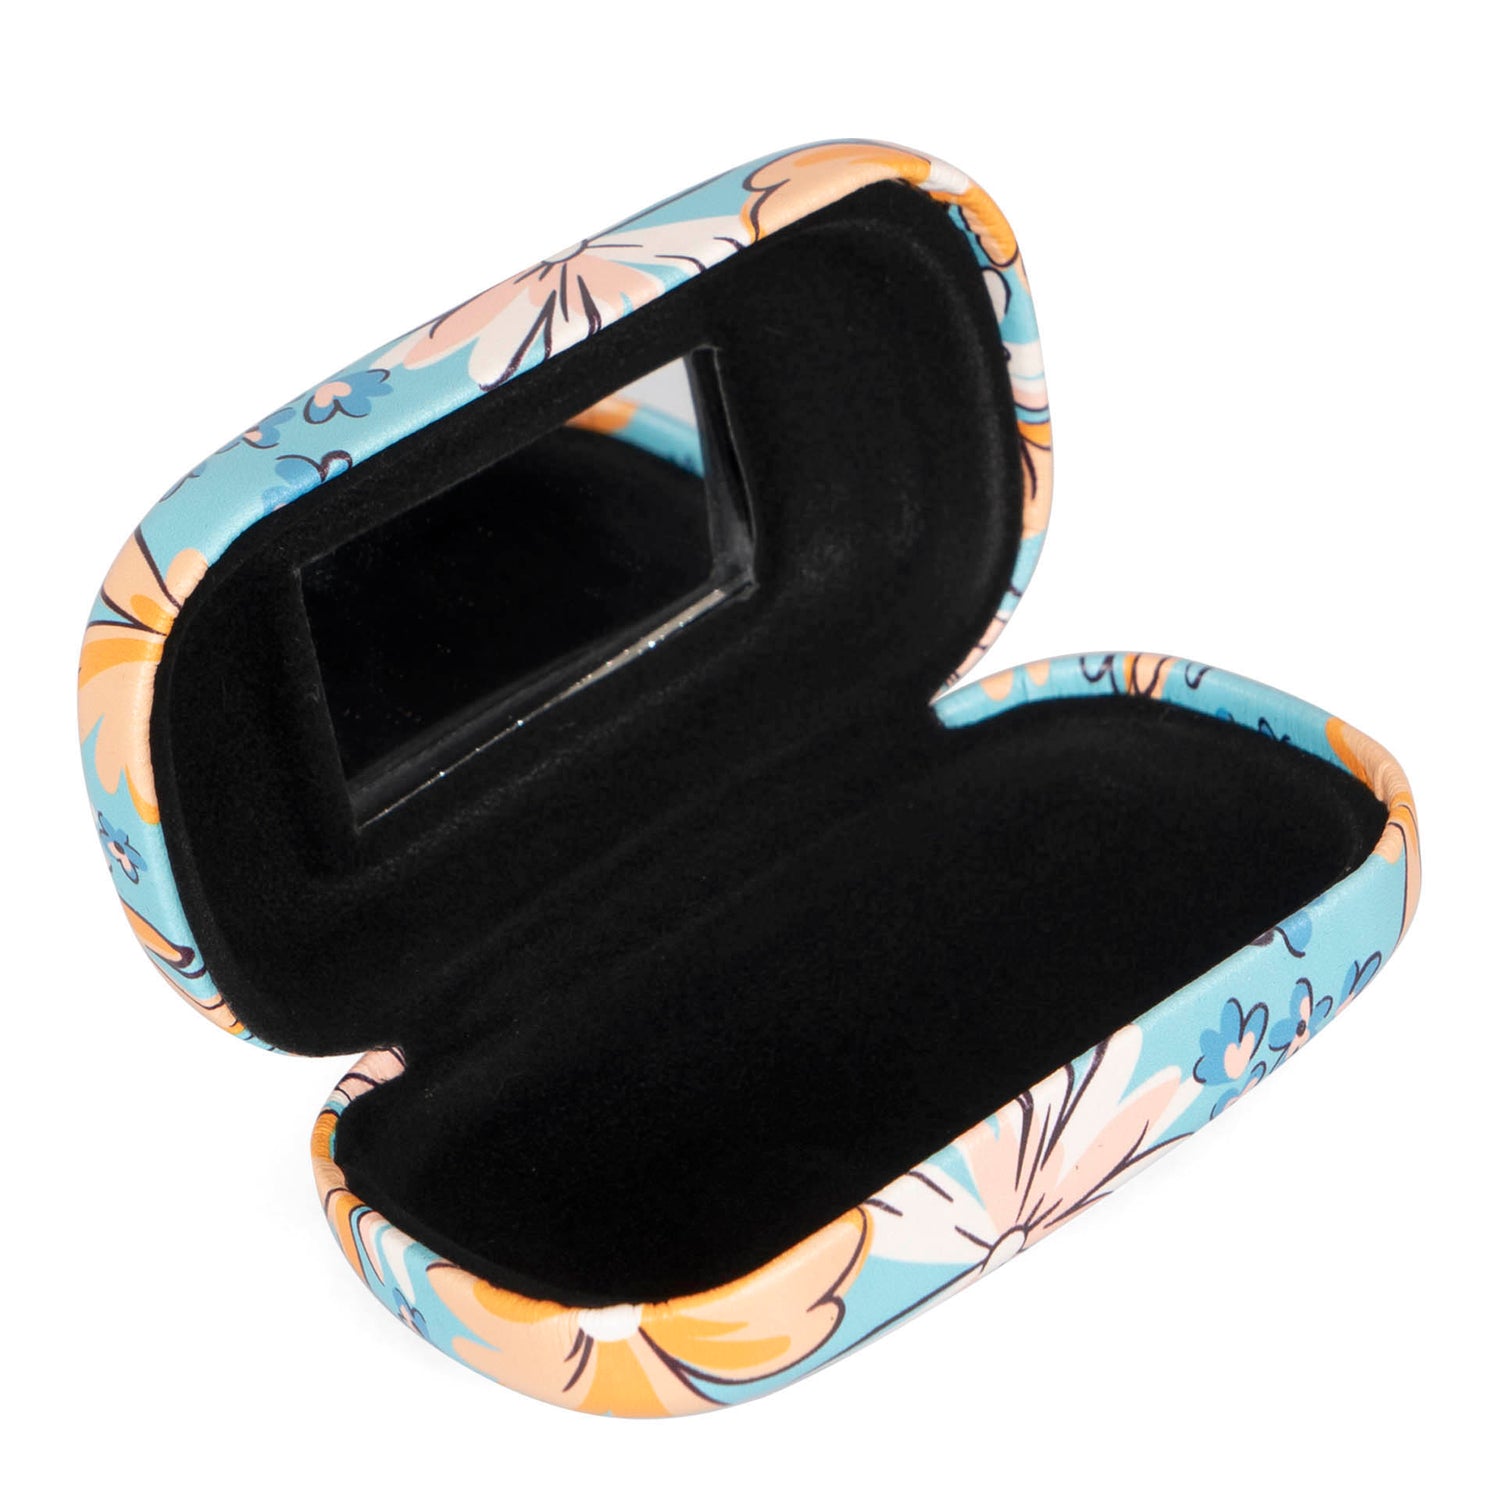 Floral Water Snap Top Case